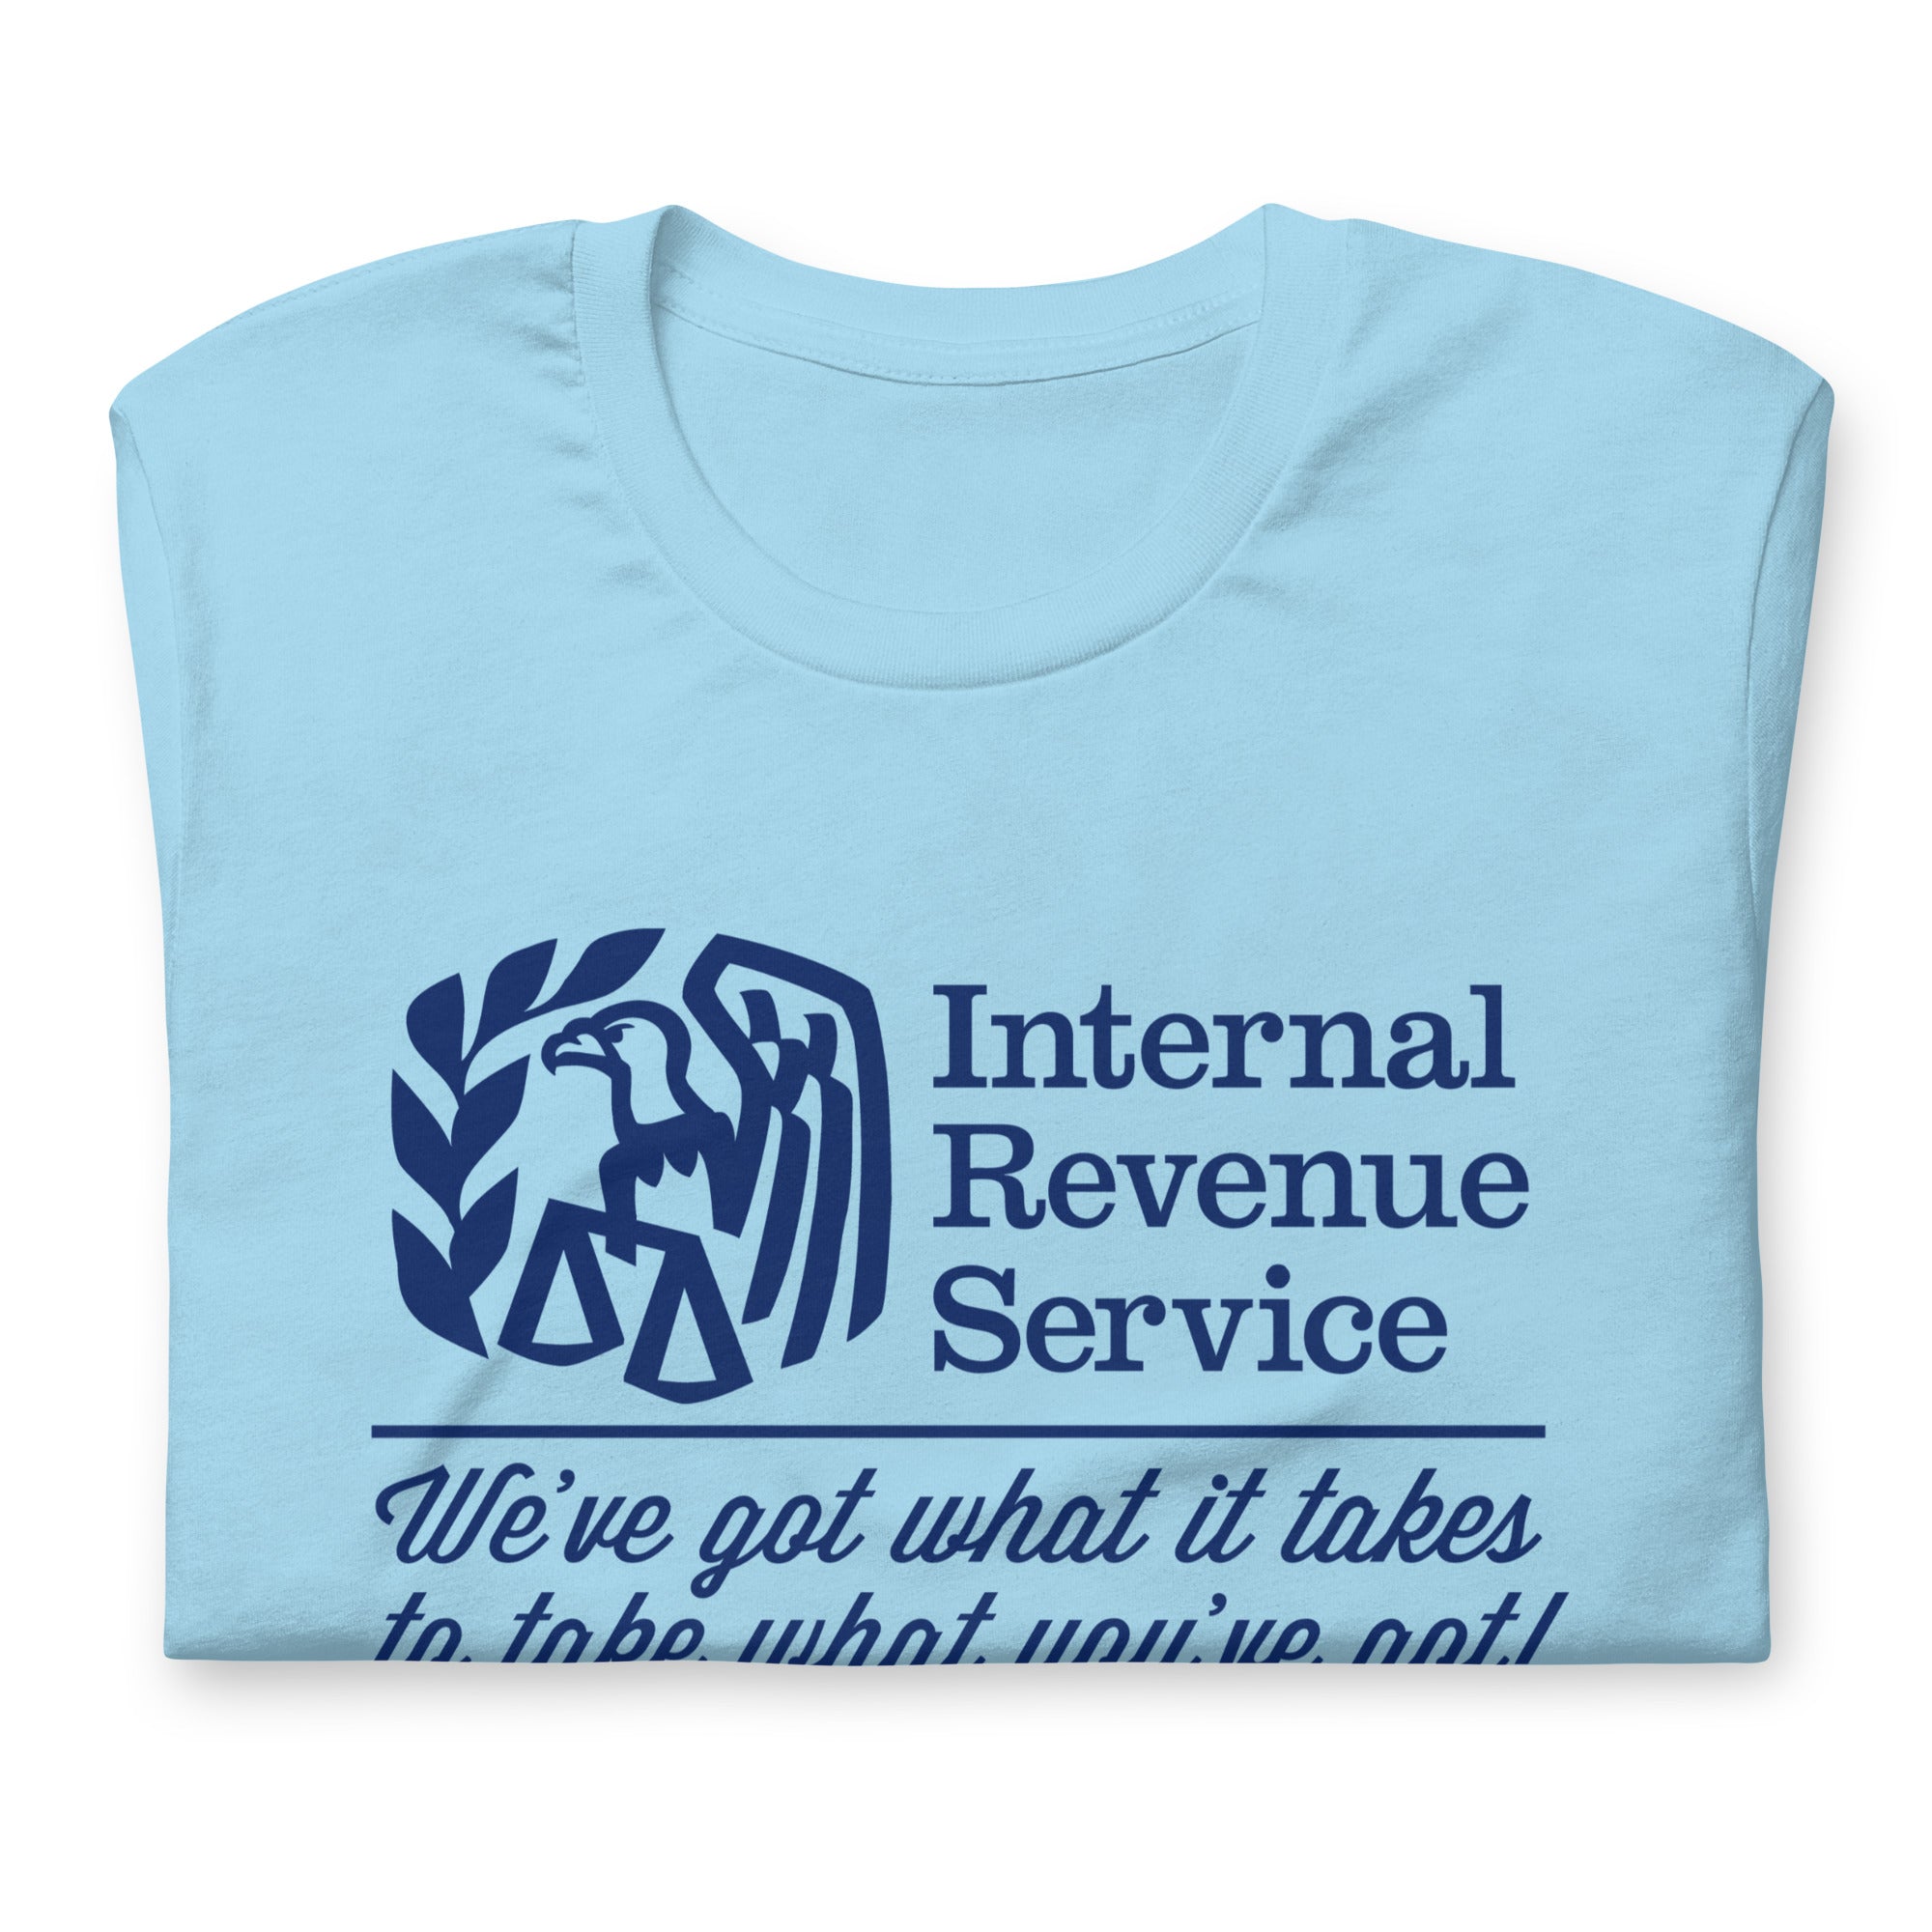 IRS We've Got What It Takes To Take What You've Got Shirts